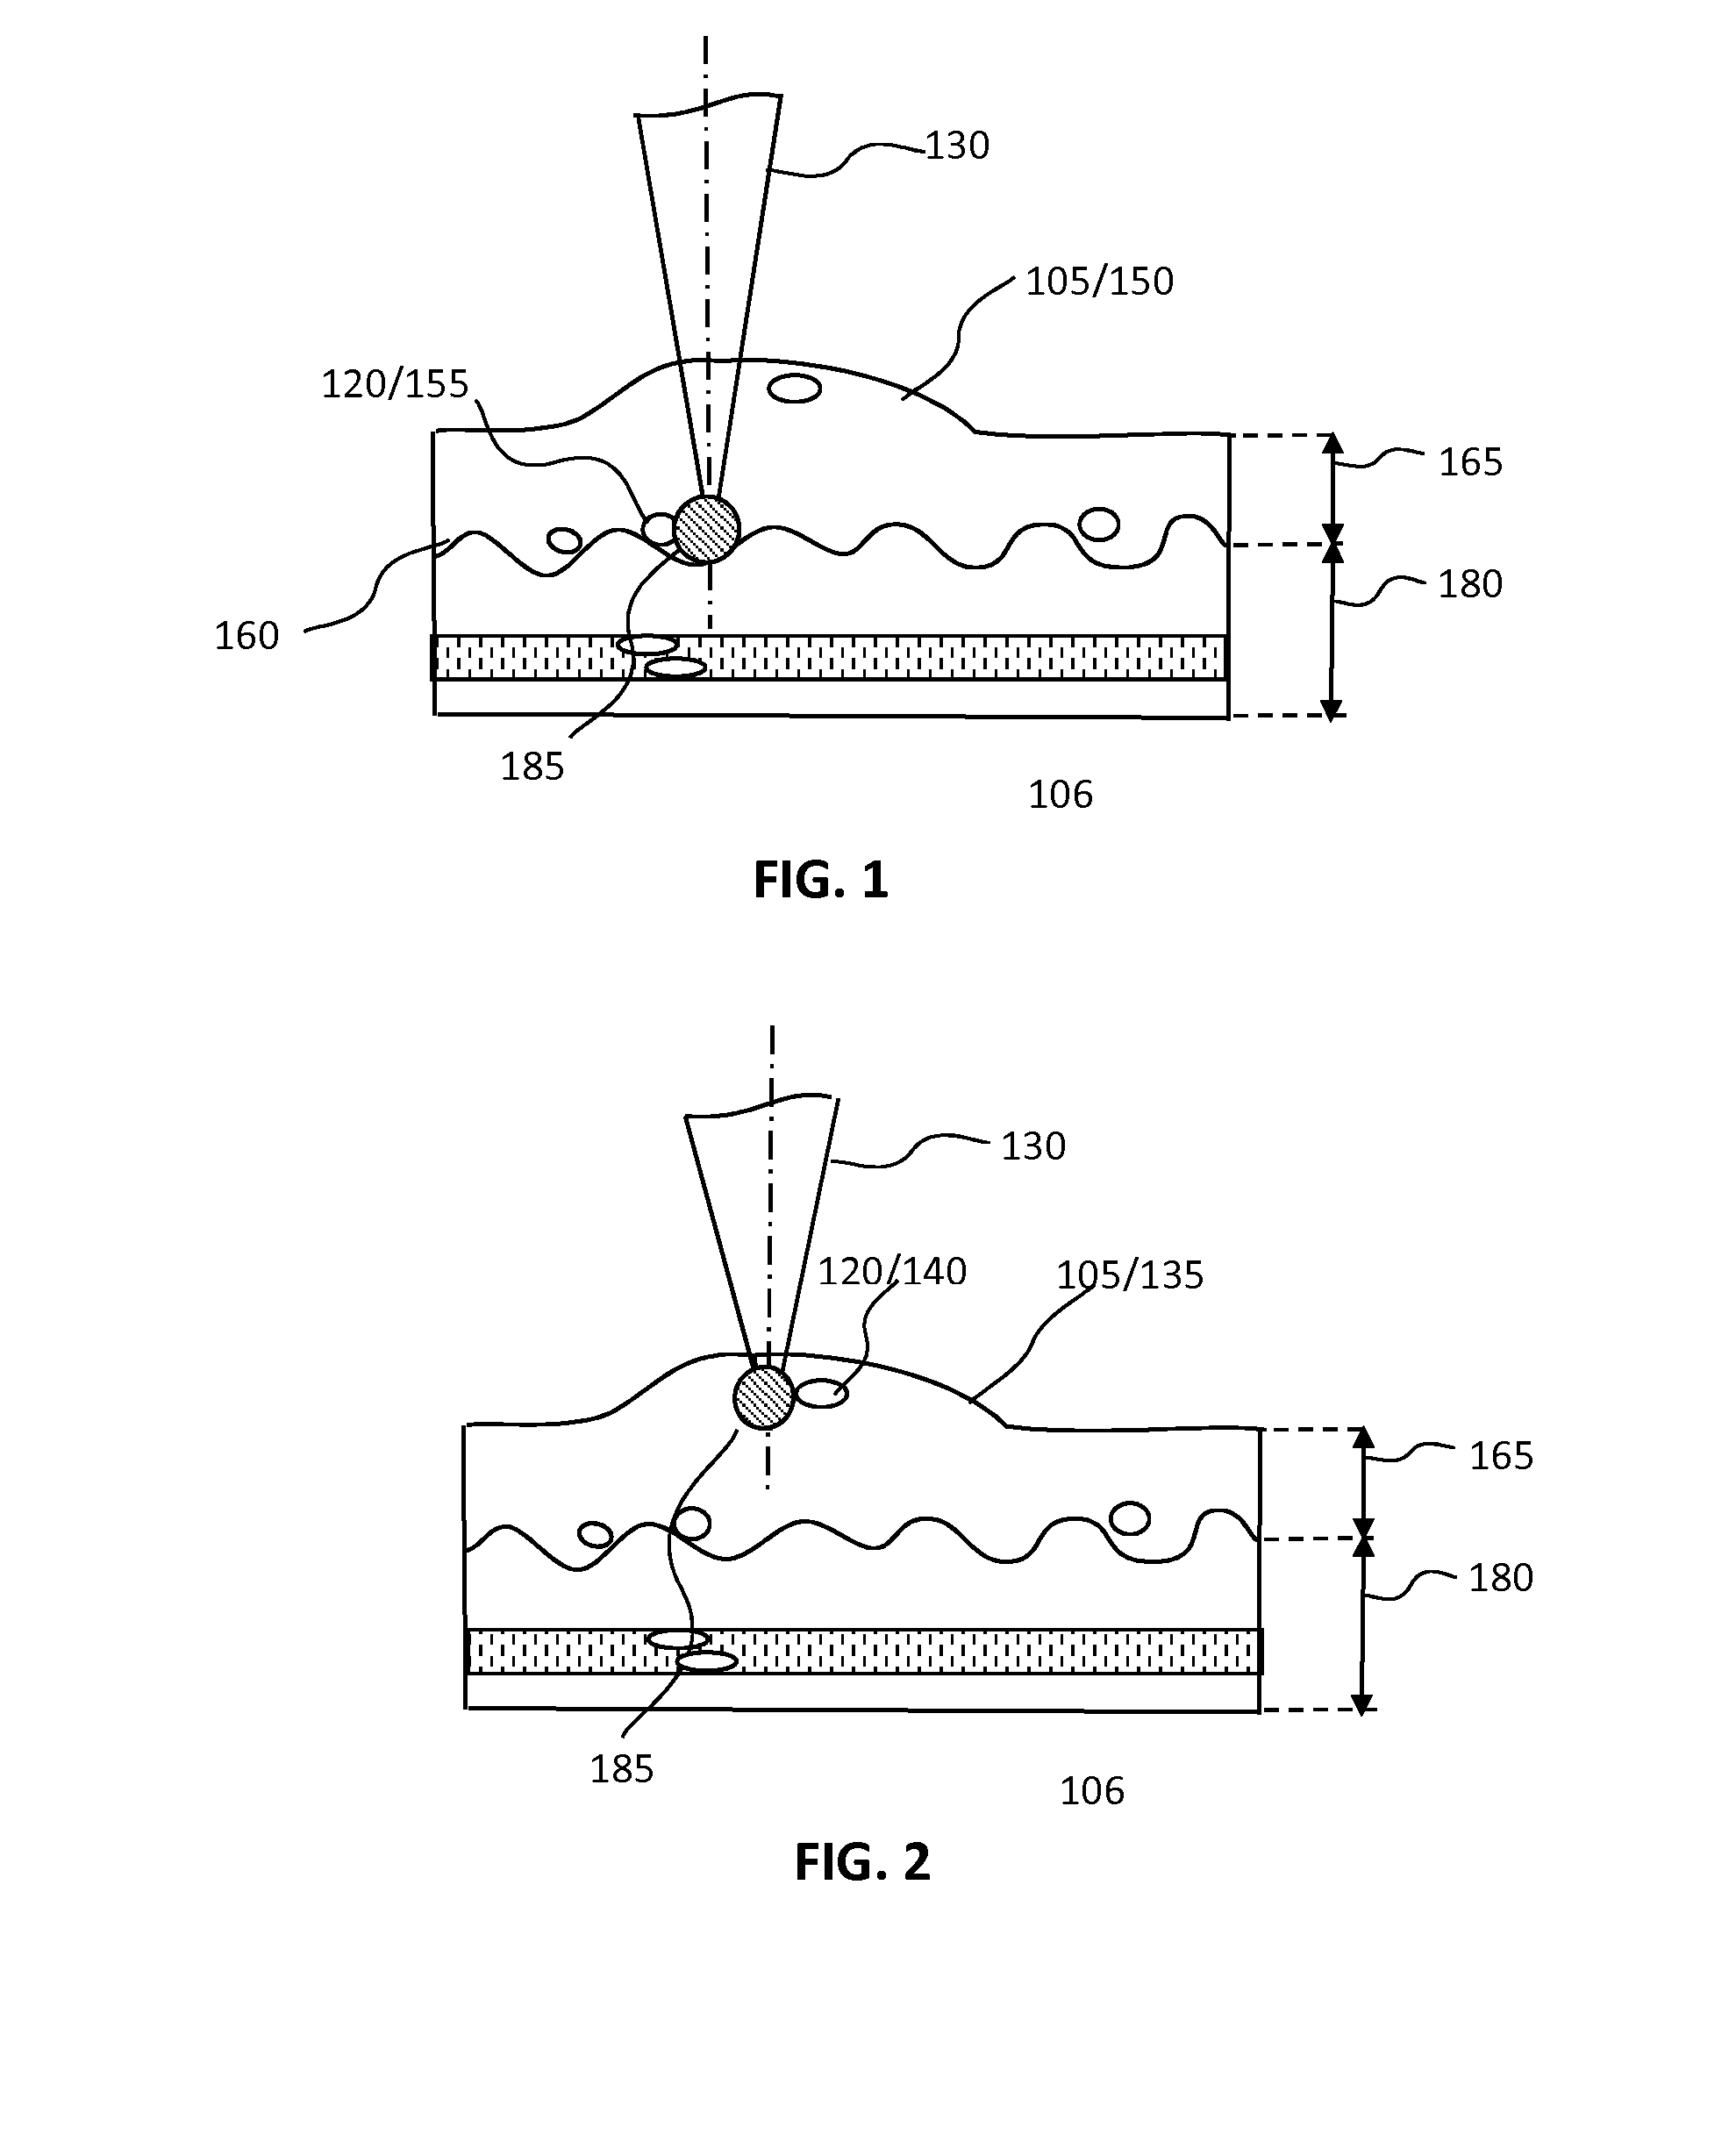 Methods to Alter Damaged Mammalian Skin using a Multiphoton Processes